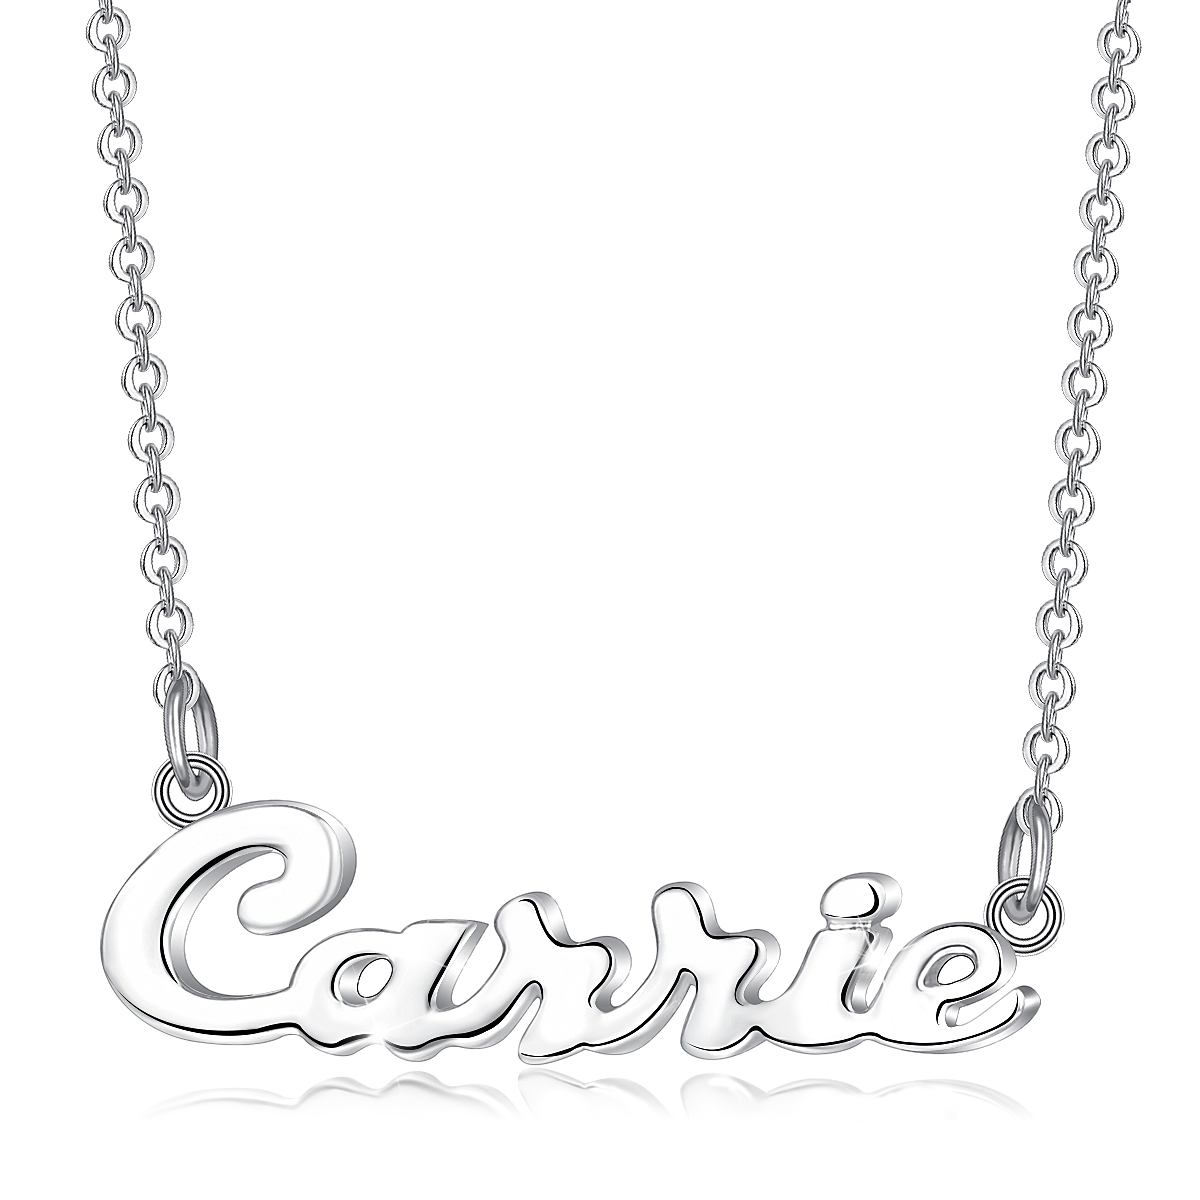 Wholesale Vendor Alphabet Letter Personalized Custom Jewelry 925 Sterling Silver Name Plate Necklace